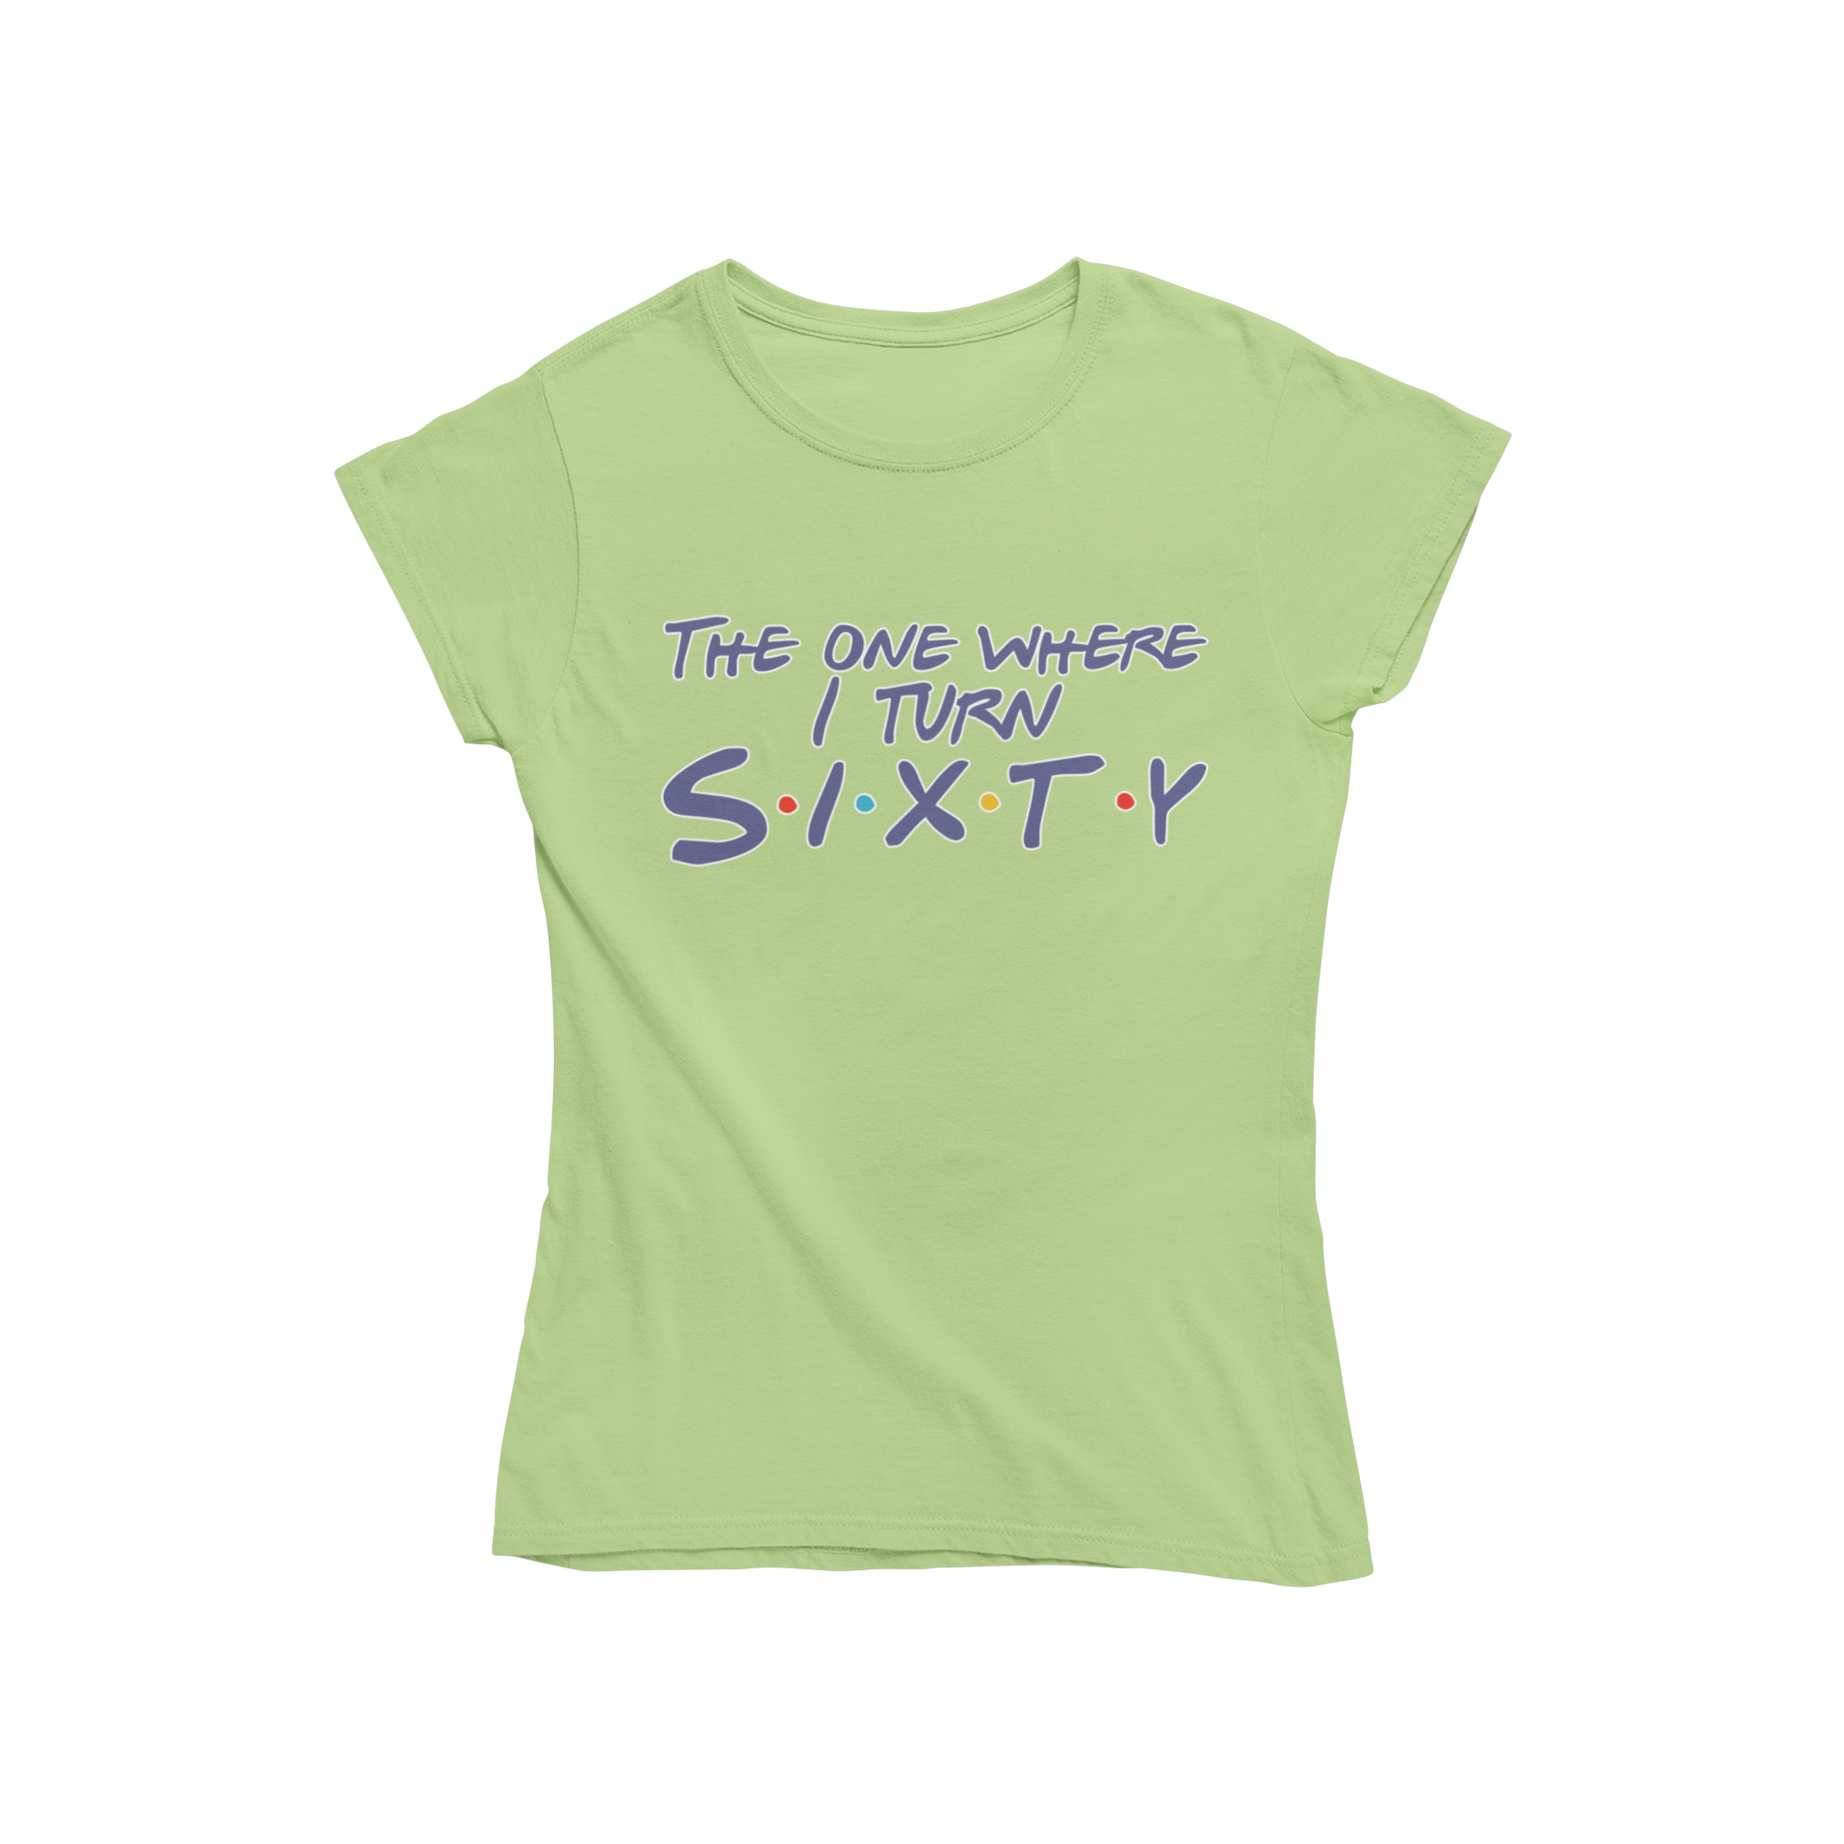 Celebrate your milestone birthday in style with our Where I Turn Sixty Womens T-shirt. Inspired by the iconic TV show Friends, this fitted shirt features the memorable slogan "the one where i turn sixty". Made for comfort and style, it's the perfect addition to your wardrobe.